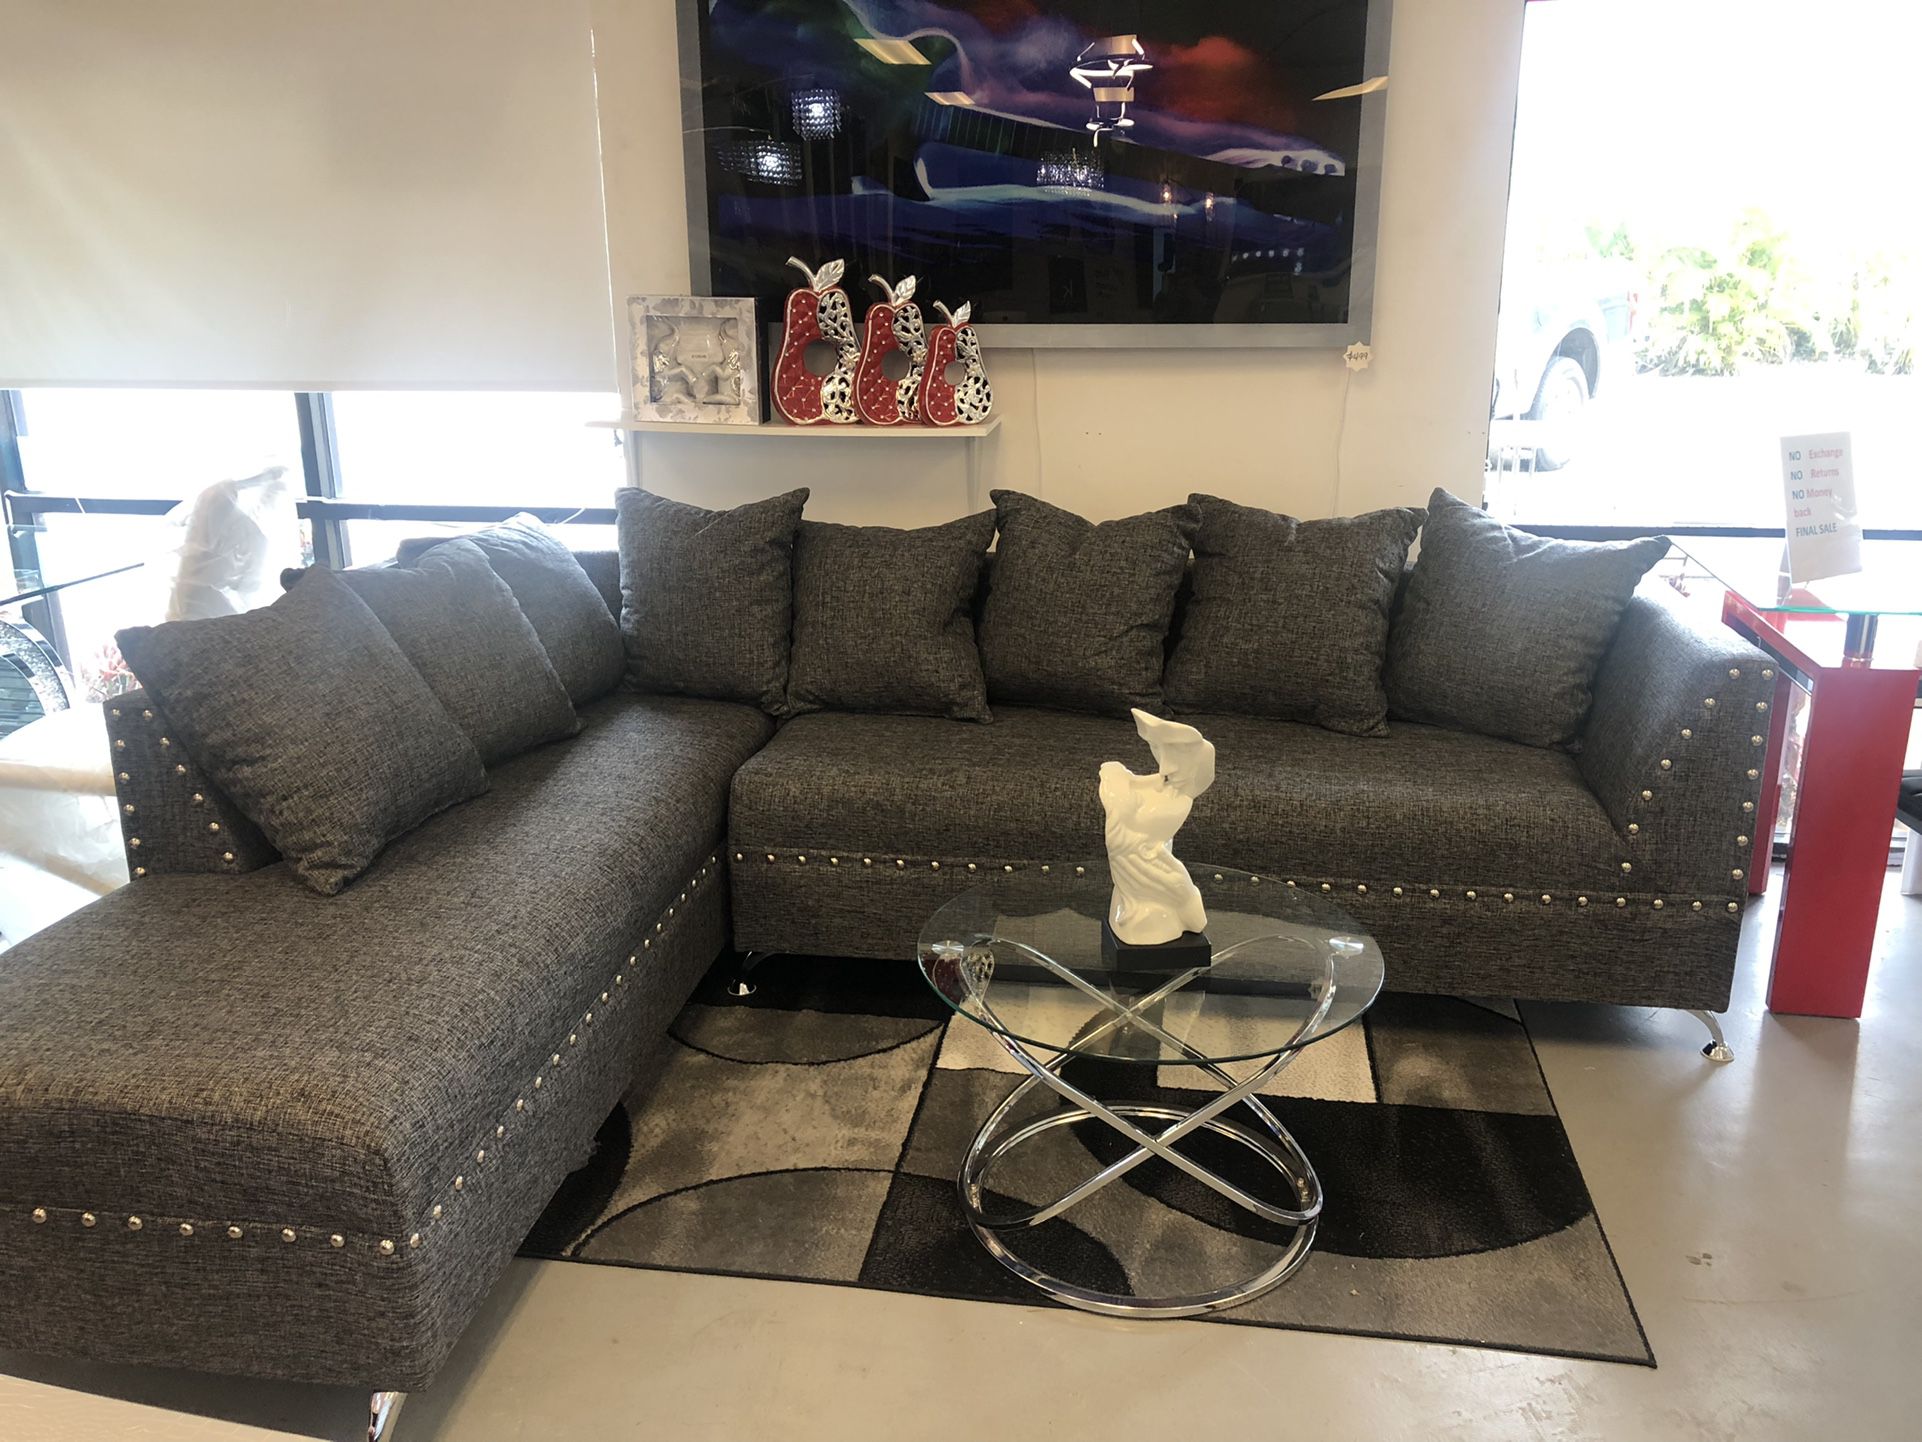 New Sectional L Shape Fabric With Nail Trim Metal Legs K Furniture And More 5513 8th Street W Suite 10 Lehigh 